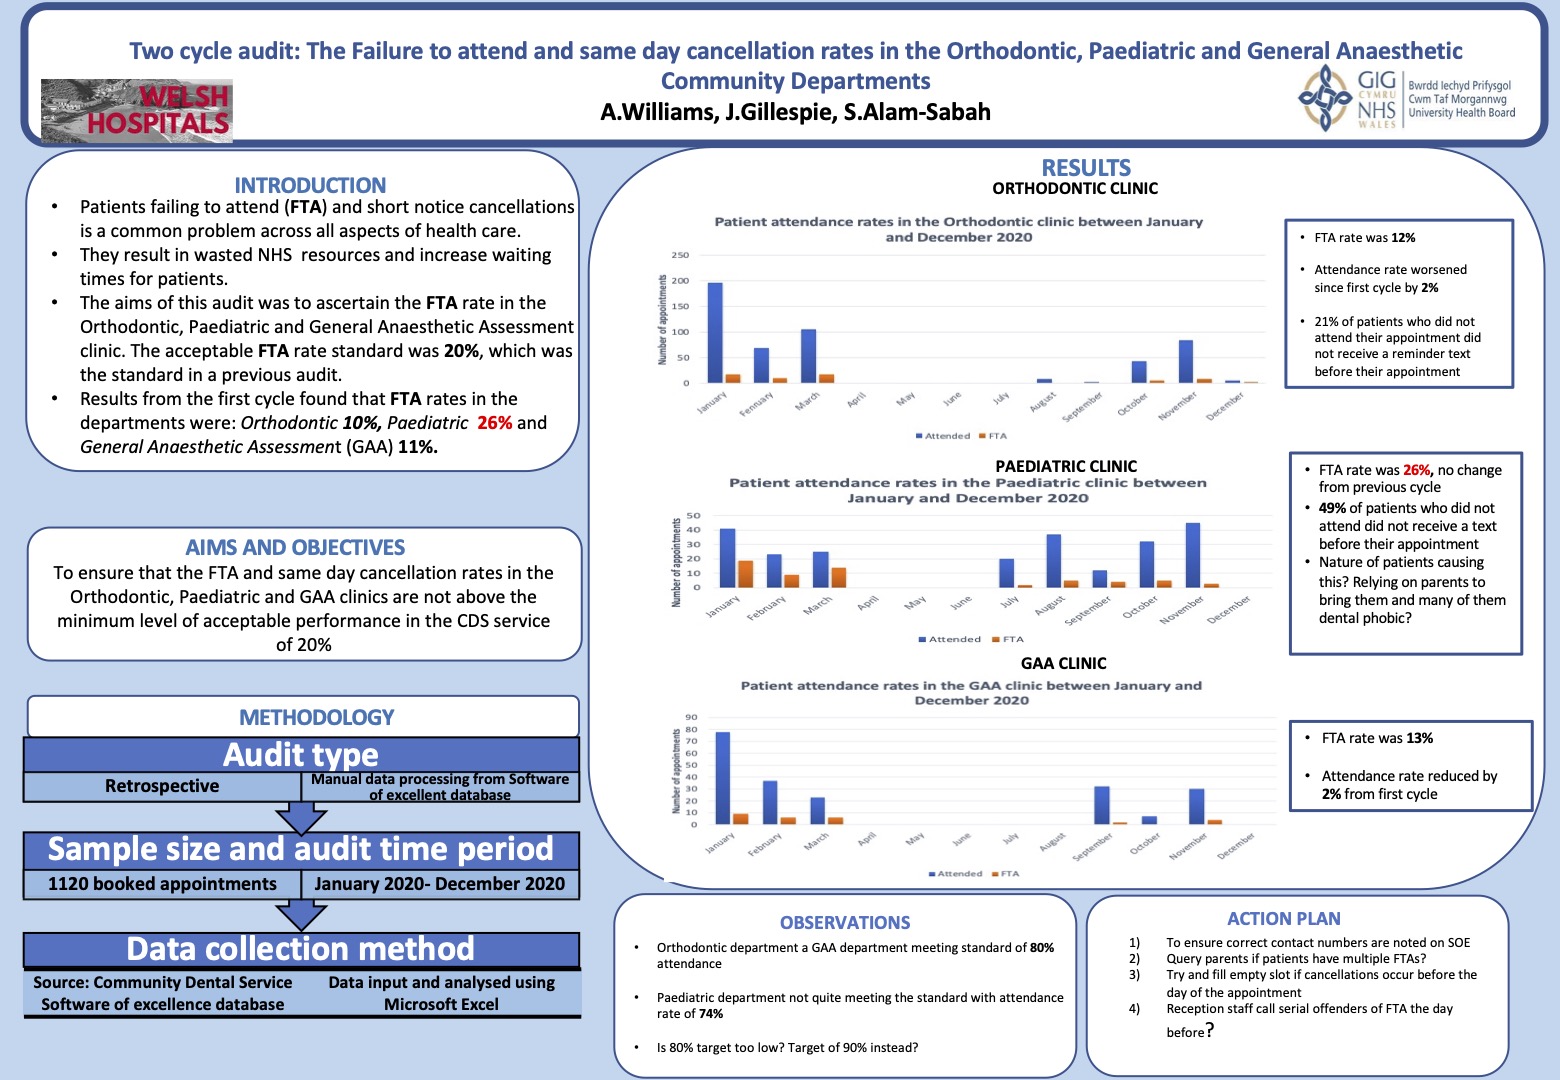 Poster A two cycle audit of appointment adherence within the Orthodontic, Paediatric and General anaesthetic community dental services department